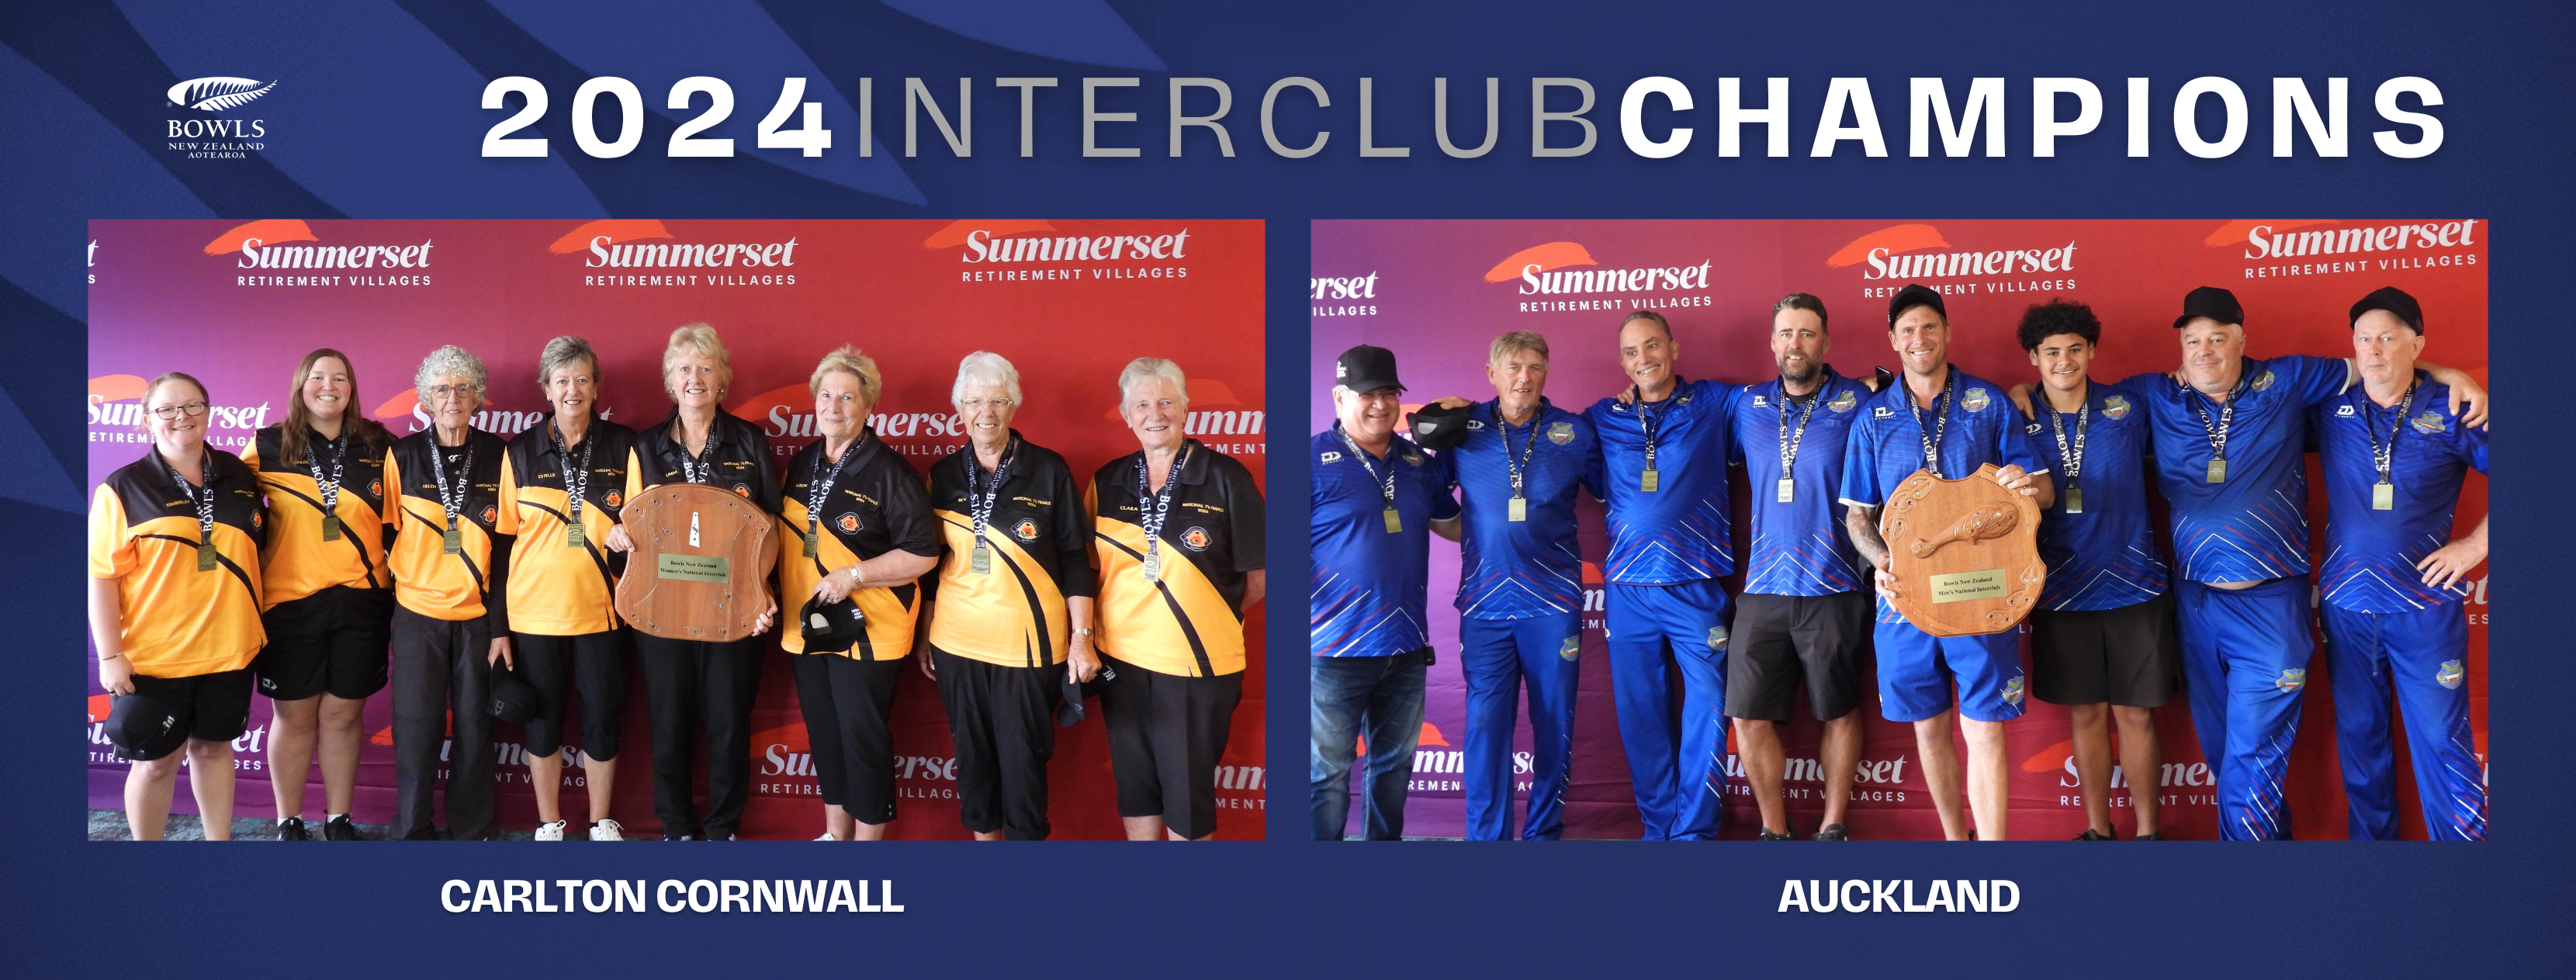 Featured Image for “2024 Interclub Champions”